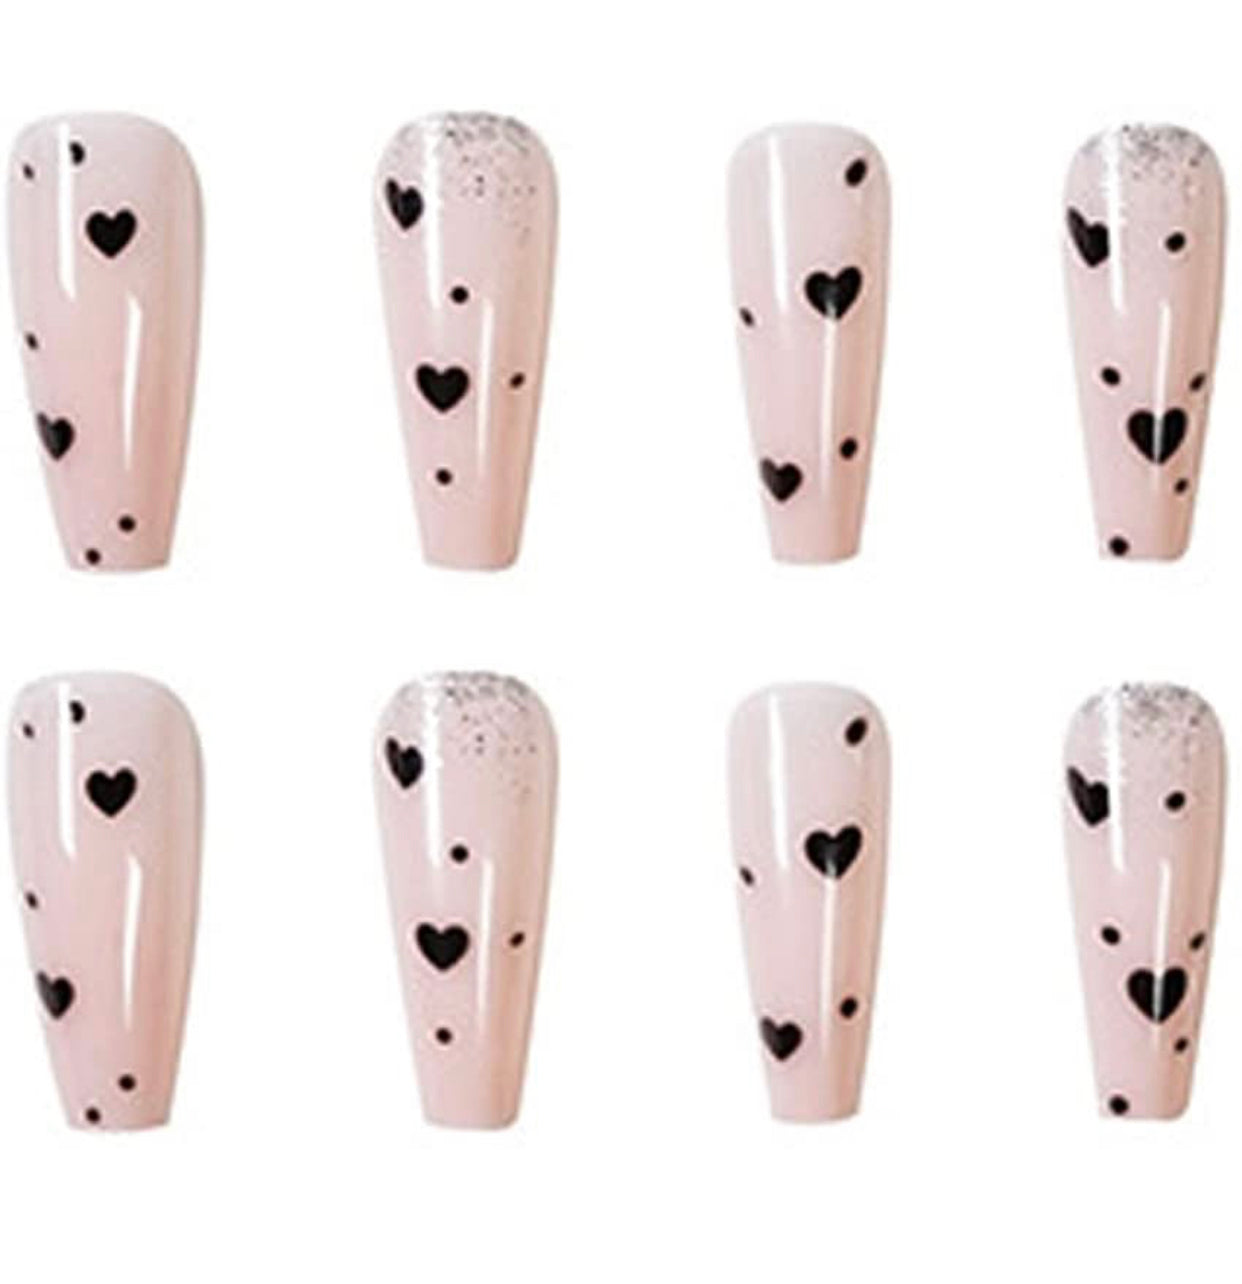 ROMANTIC PINK PRESS ON NAILS COFFIN BALLERINA SHAPE WITH BEAUTIFUL HEARTS